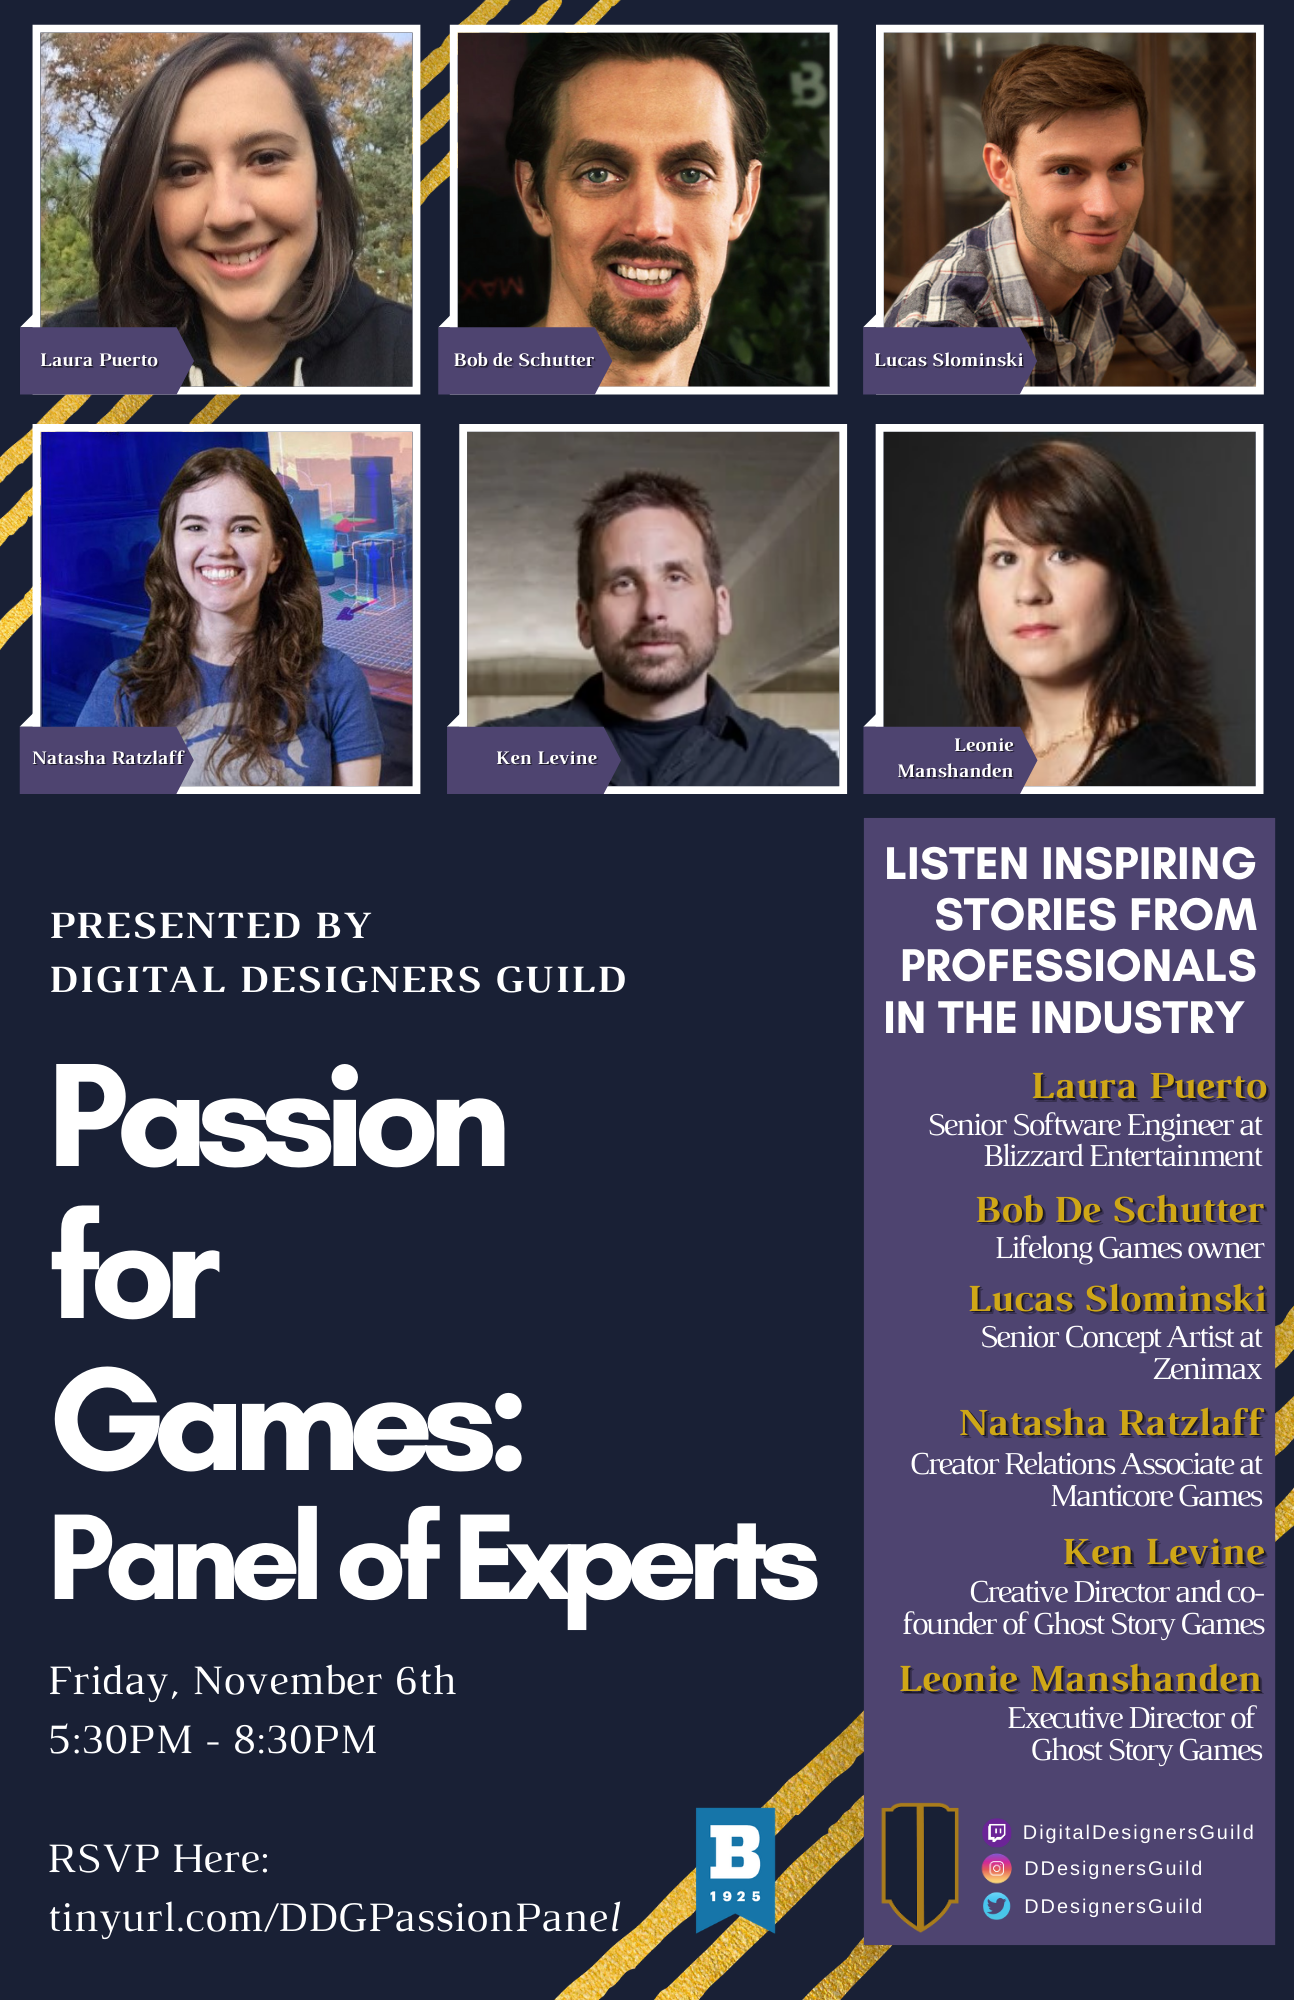 Passion for Games: Panel of Experts